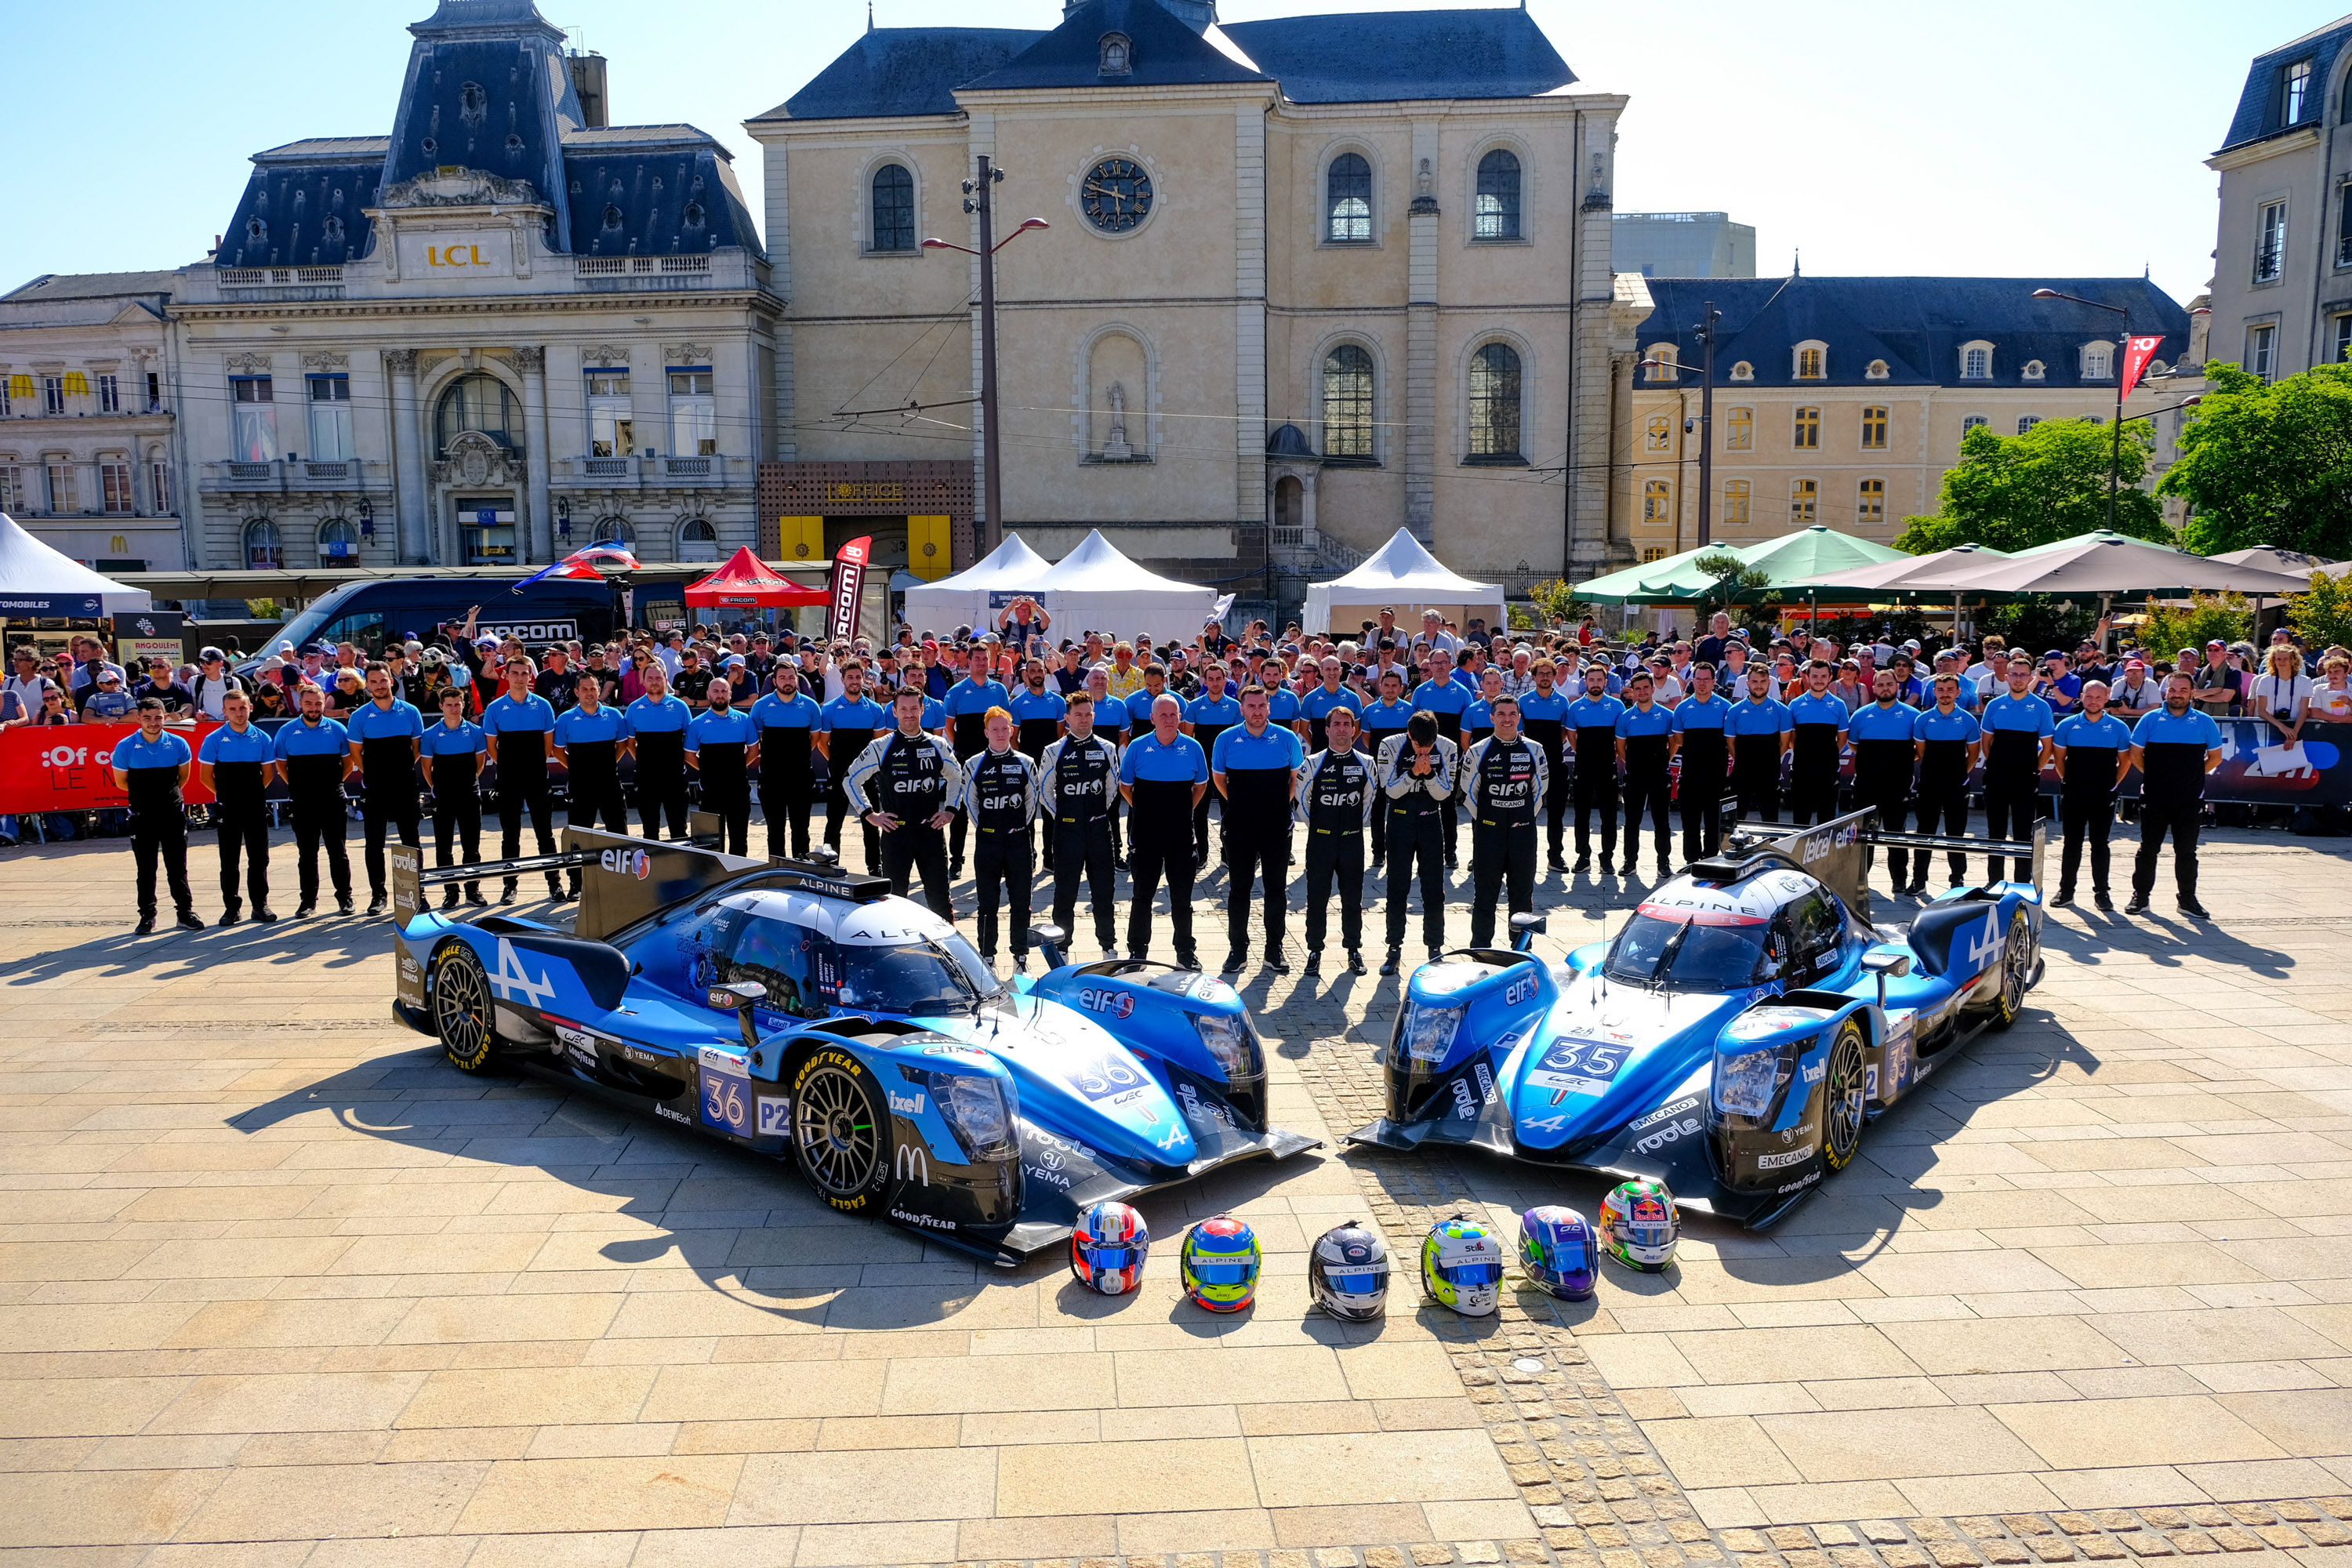 The Alpine team will unveil its Hypercar on Friday 9 June. Who will be on board with them?